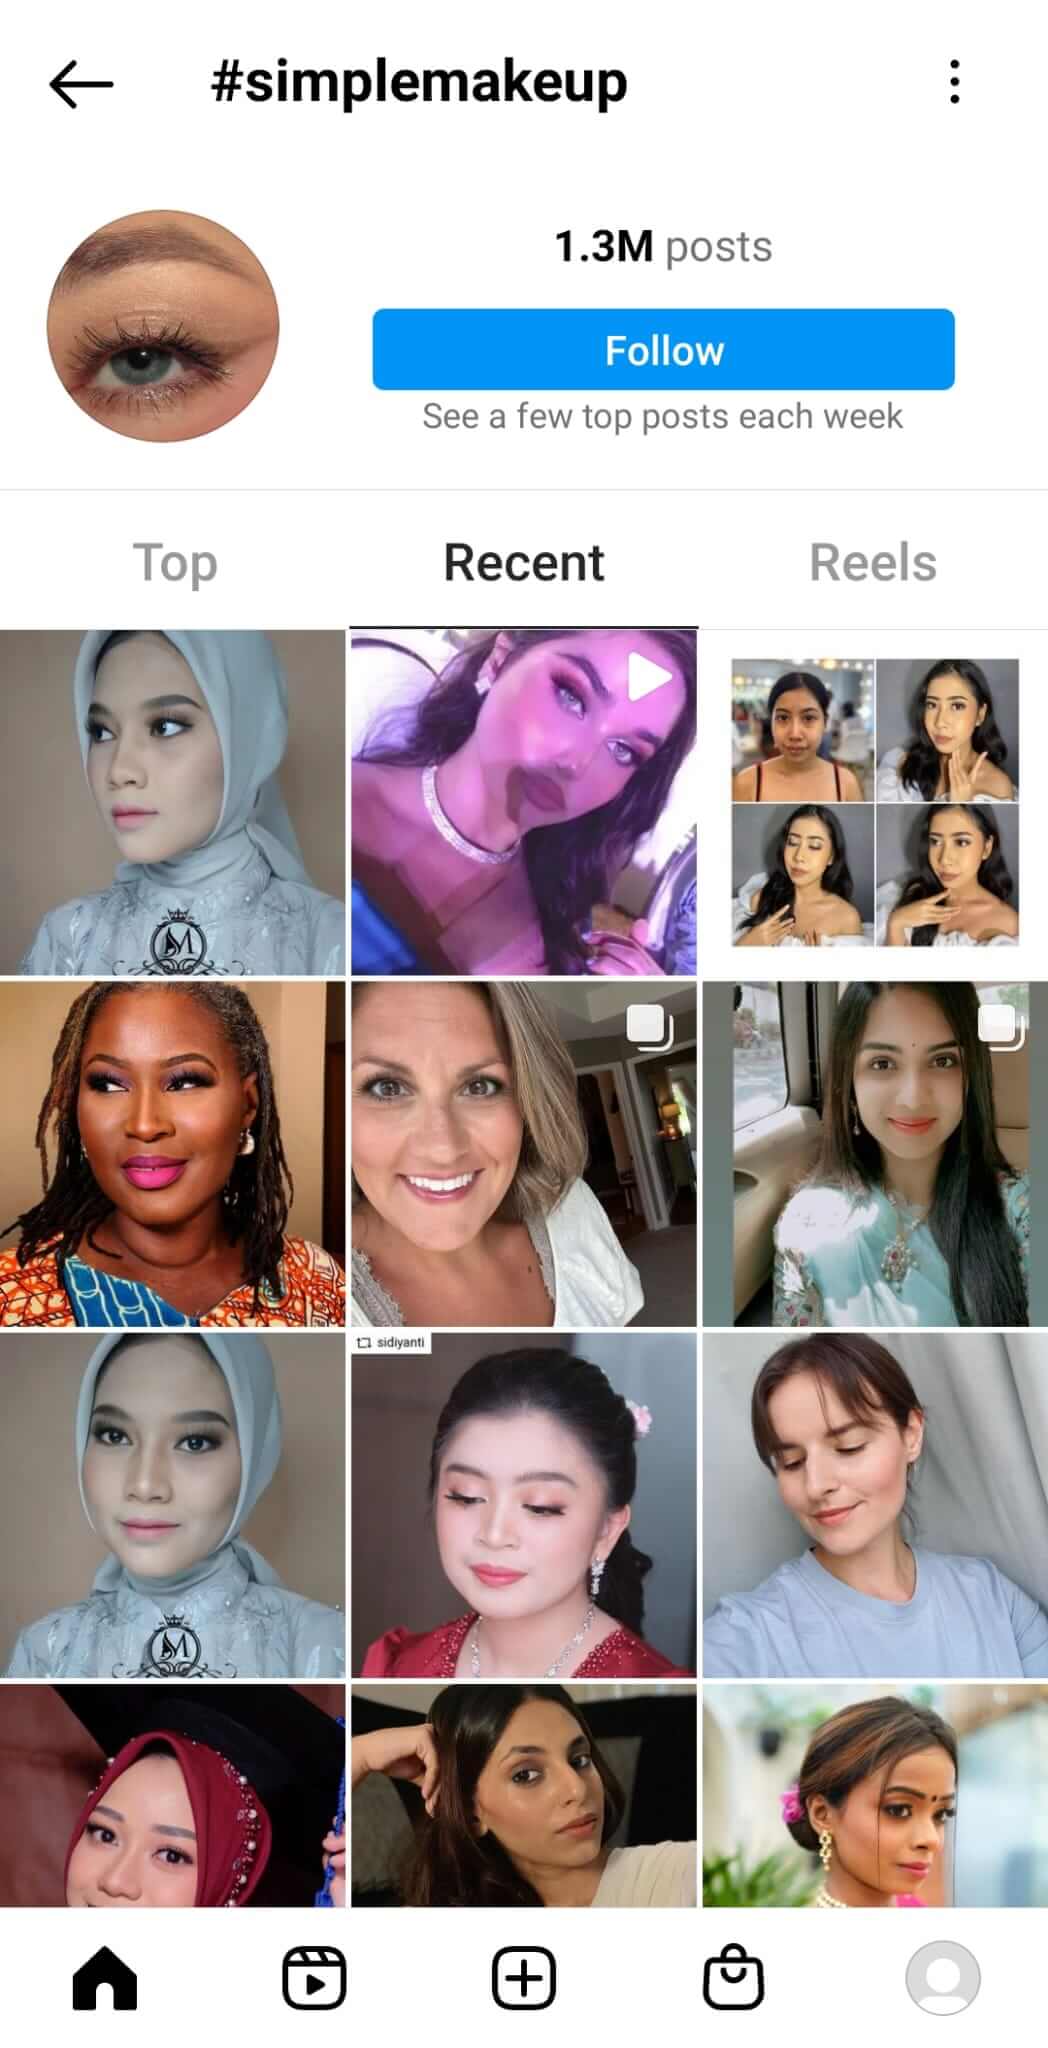 making-real-instagram-connections-finding-right-followers-simplemakeup-example-5